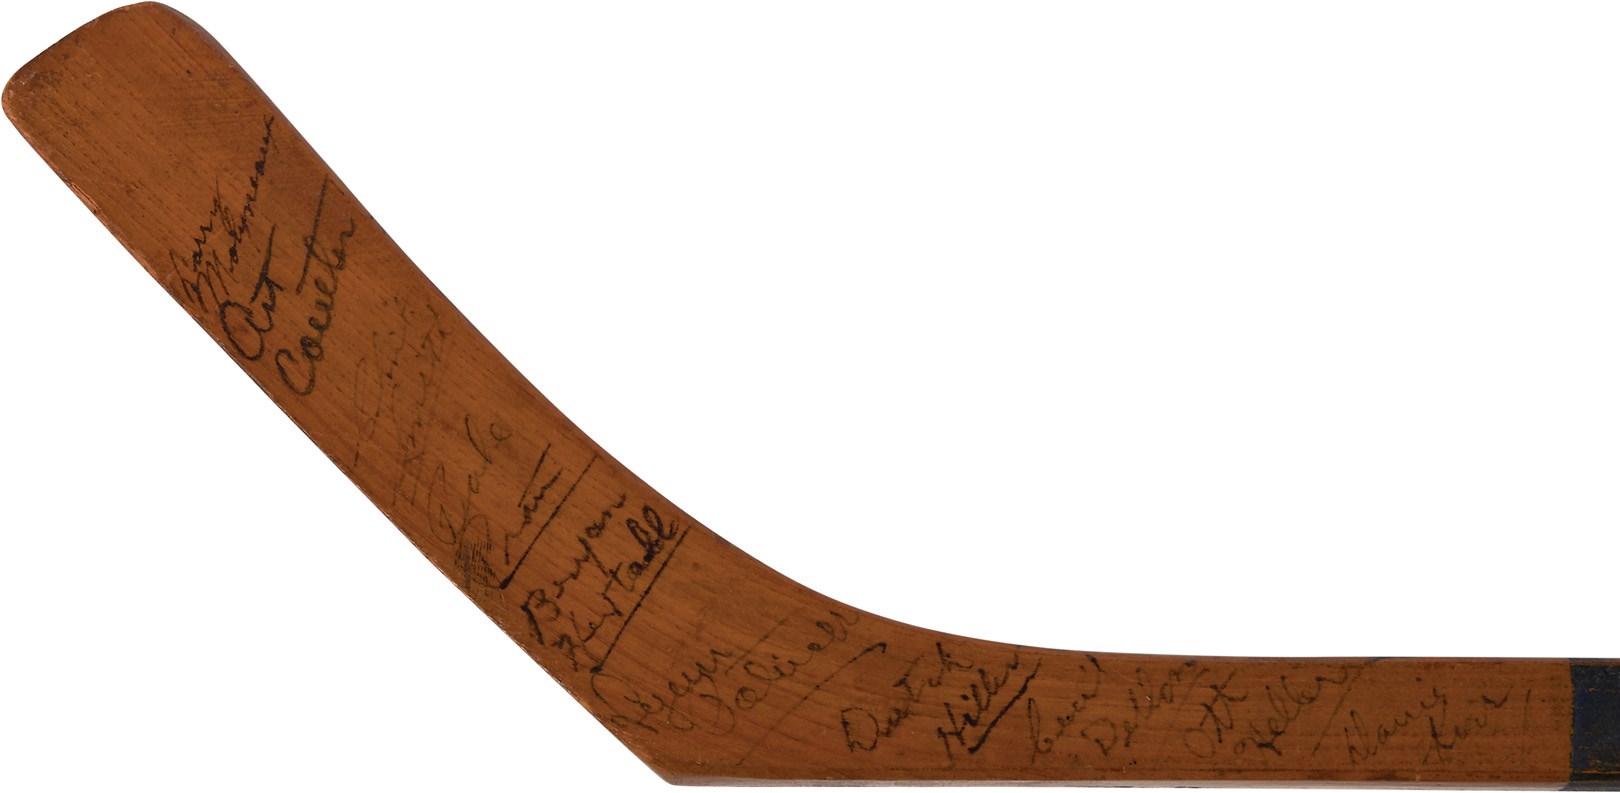 The Craig Patrick Hockey Collection - 1940 Stanley Cup Teams-Signed Mini Stick From The Patrick Family (PSA)